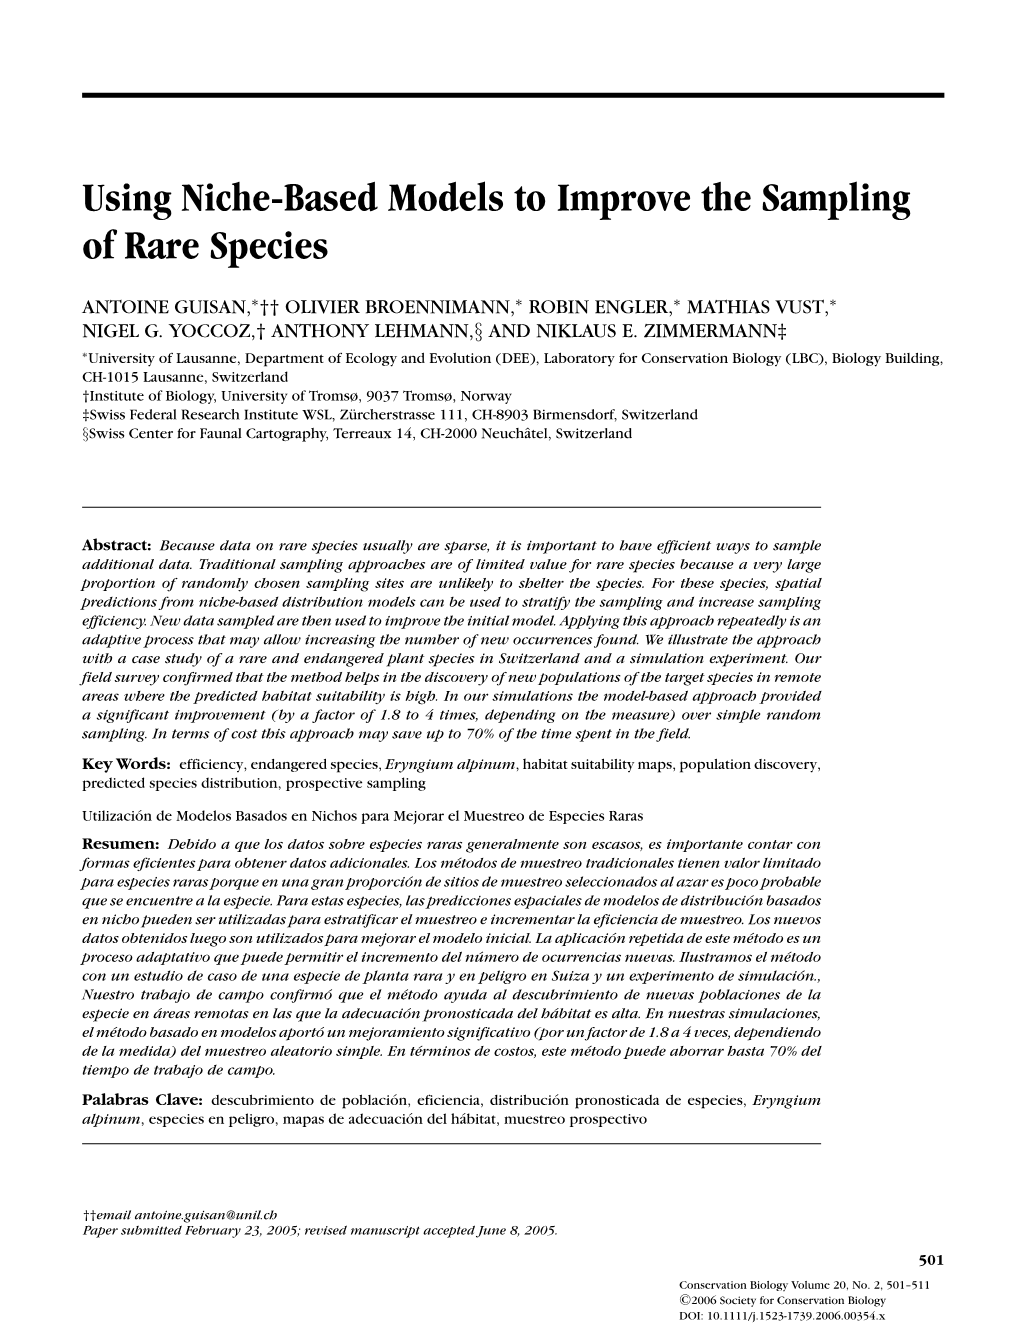 Using Niche-Based Models to Improve the Sampling of Rare Species